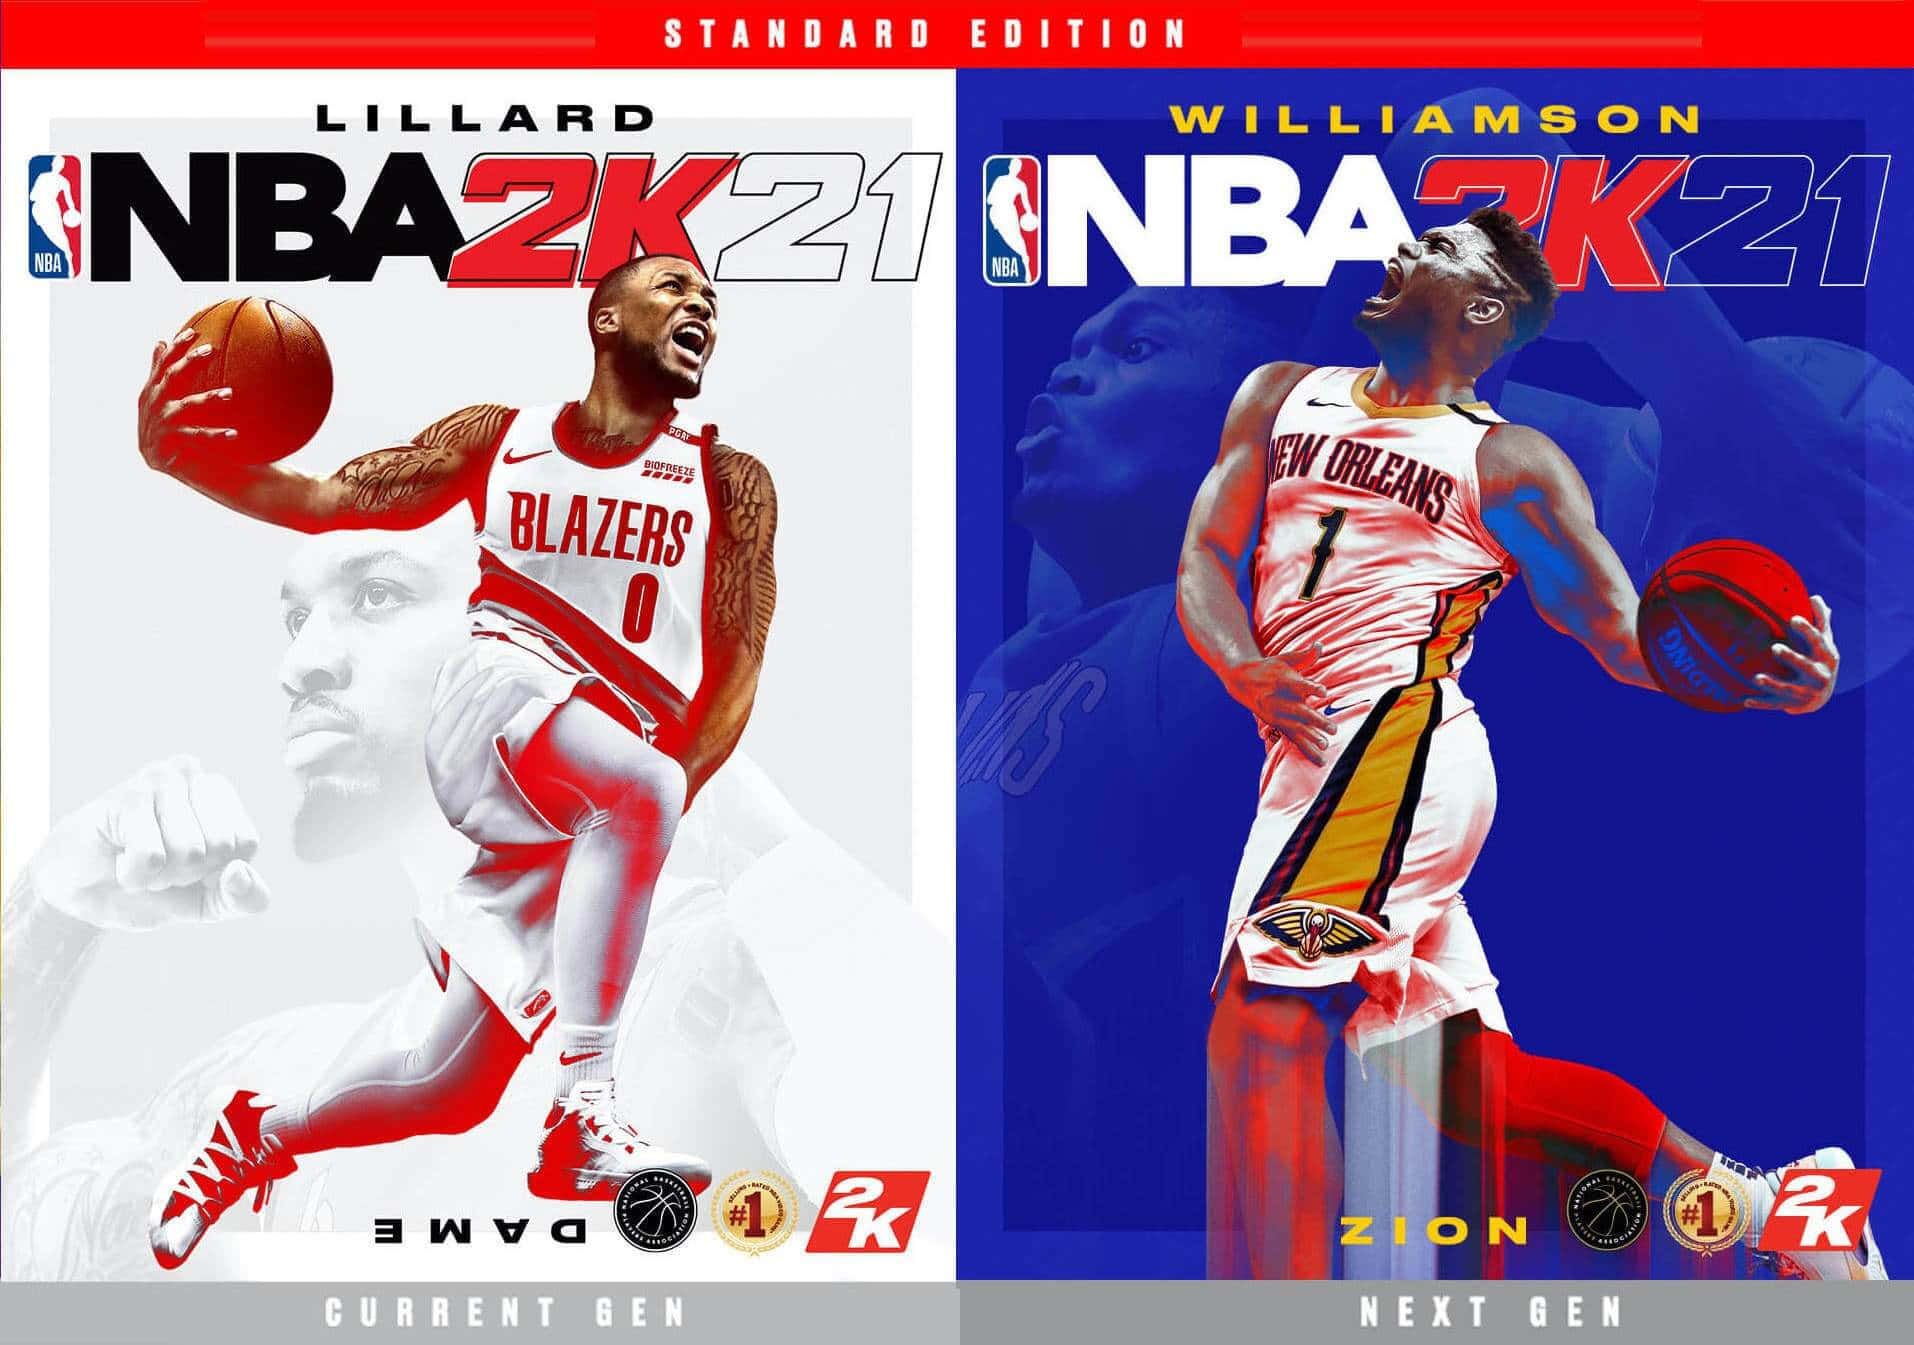 Push the limits to become the greatest basketball player with NBA 2K21 Wallpaper